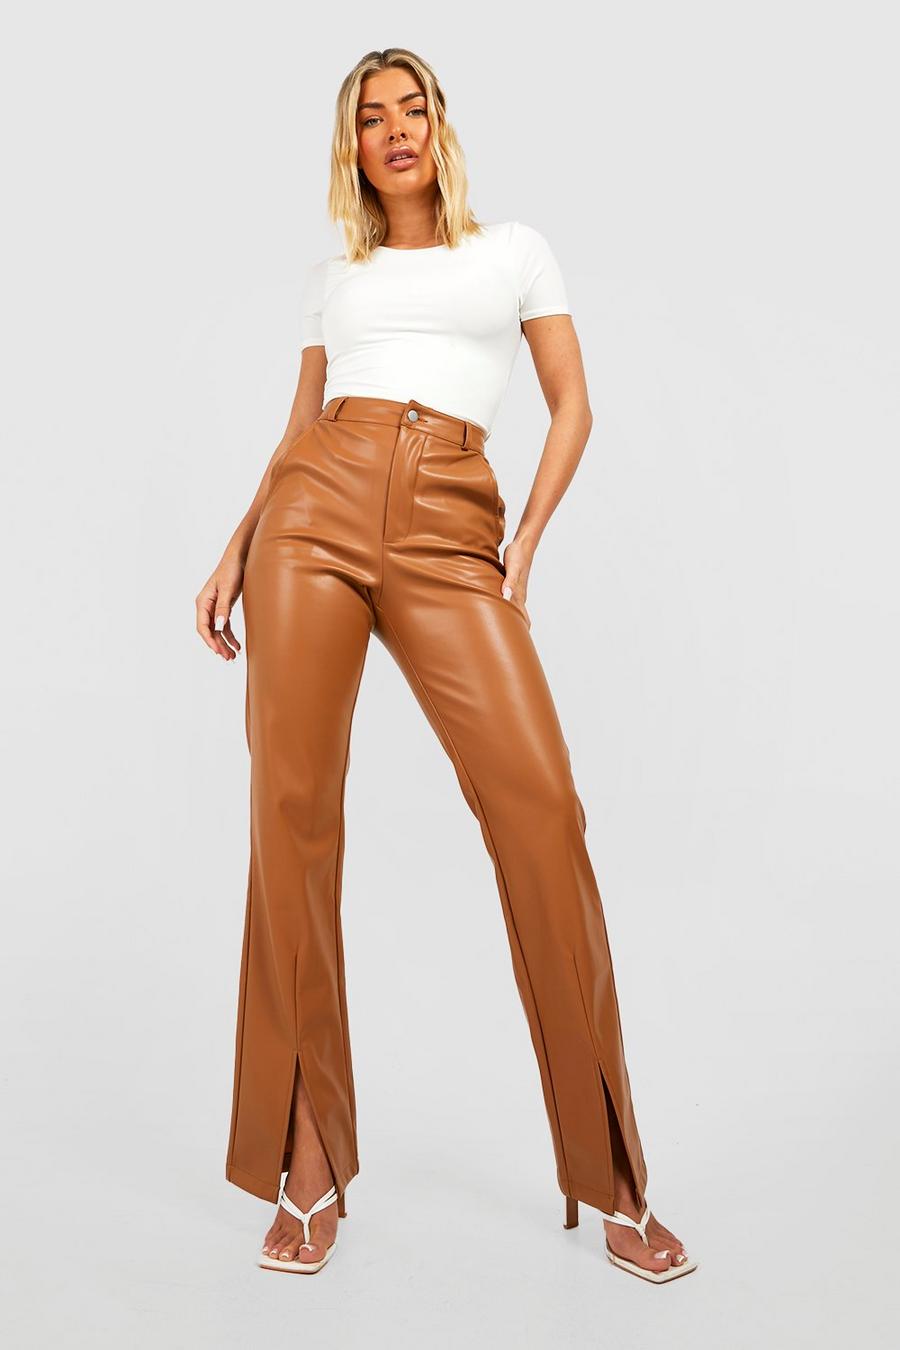 Tan Faux Leather High Waisted Split Front Pants